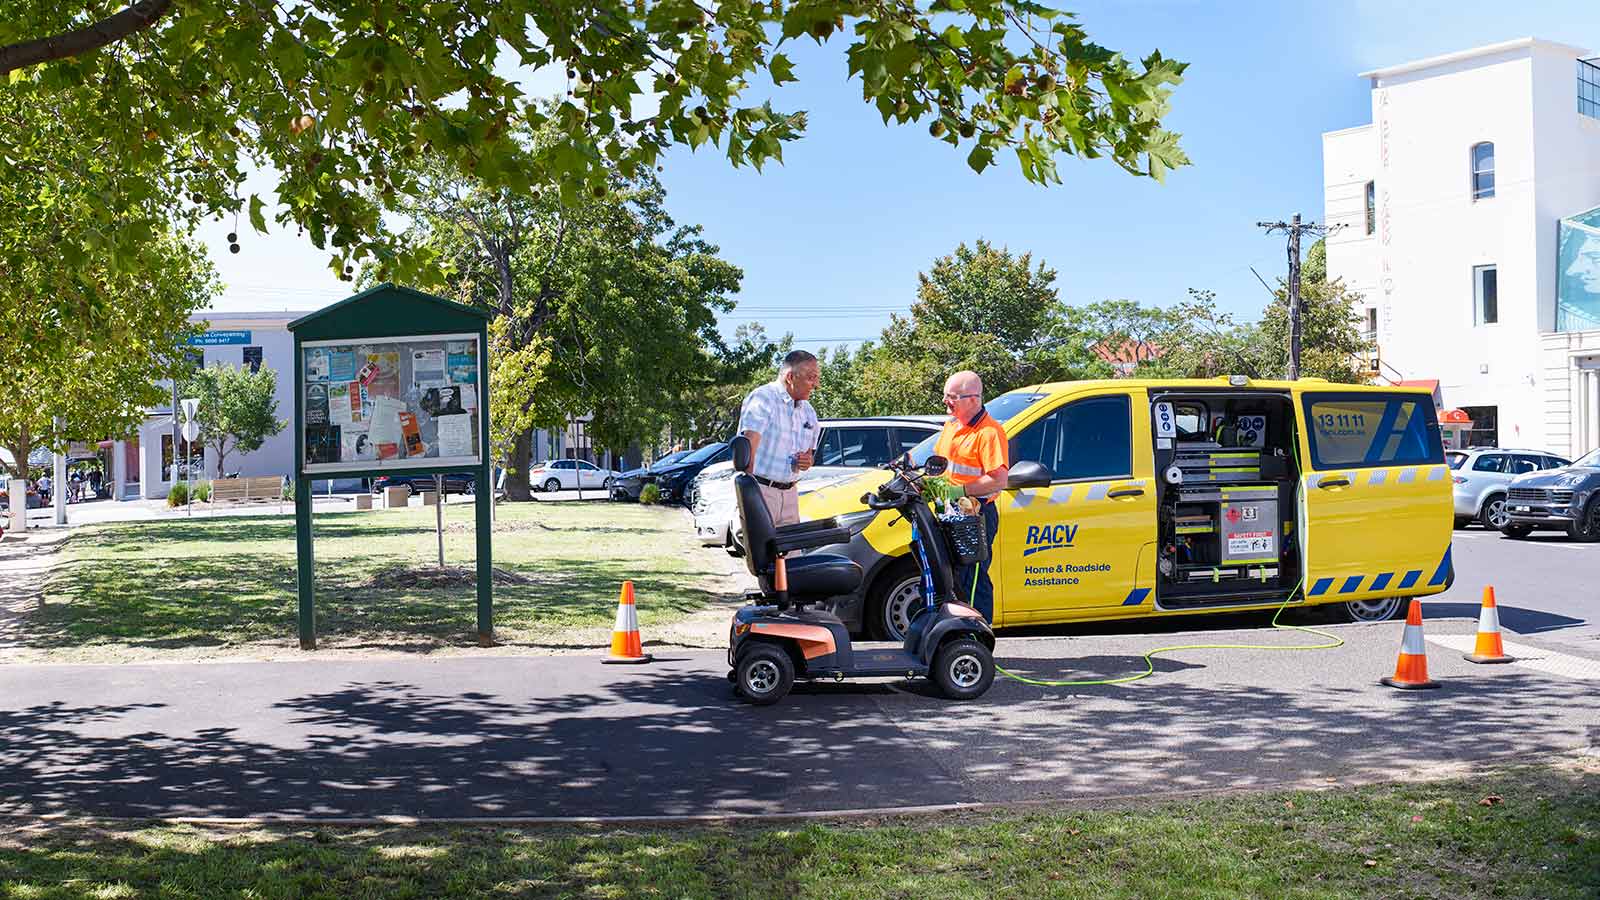 RACV technician fixing a mobility scooter and speaking with a smiling customer, with the RACV yellow patrol van behind them.